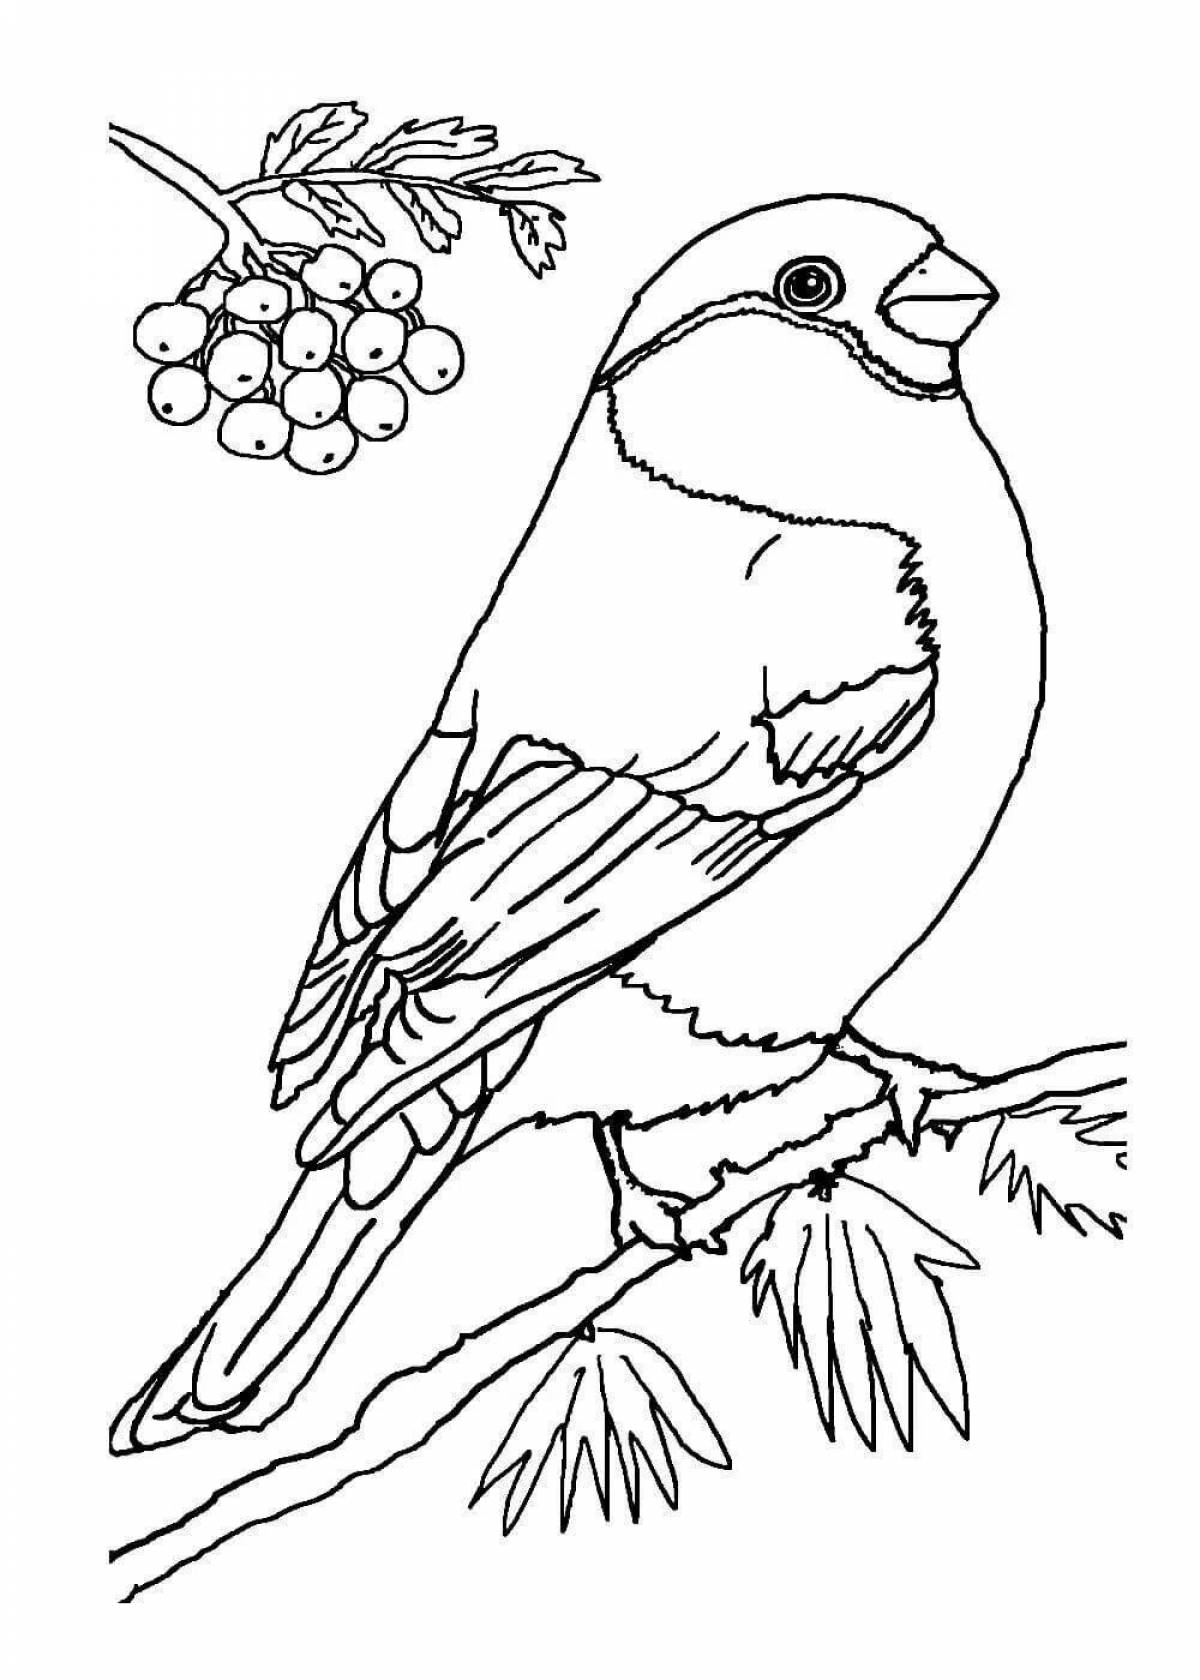 Coloring page with attractive pattern of tits